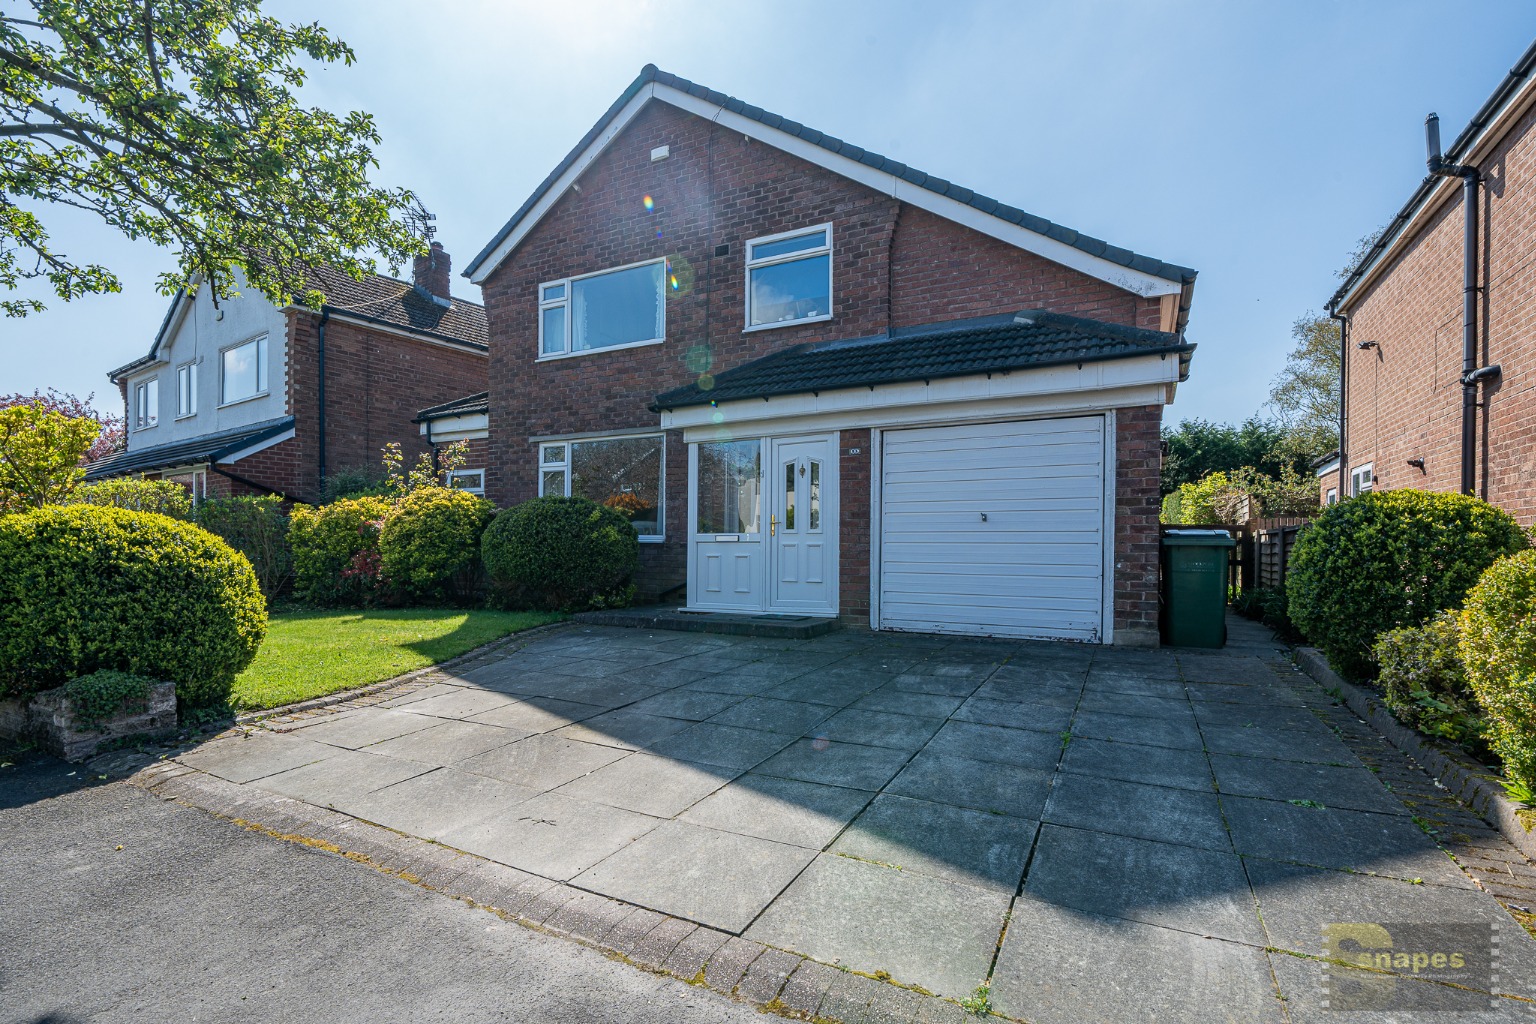 Images for Thornway, Bramhall, Cheshire, SK7 2AH